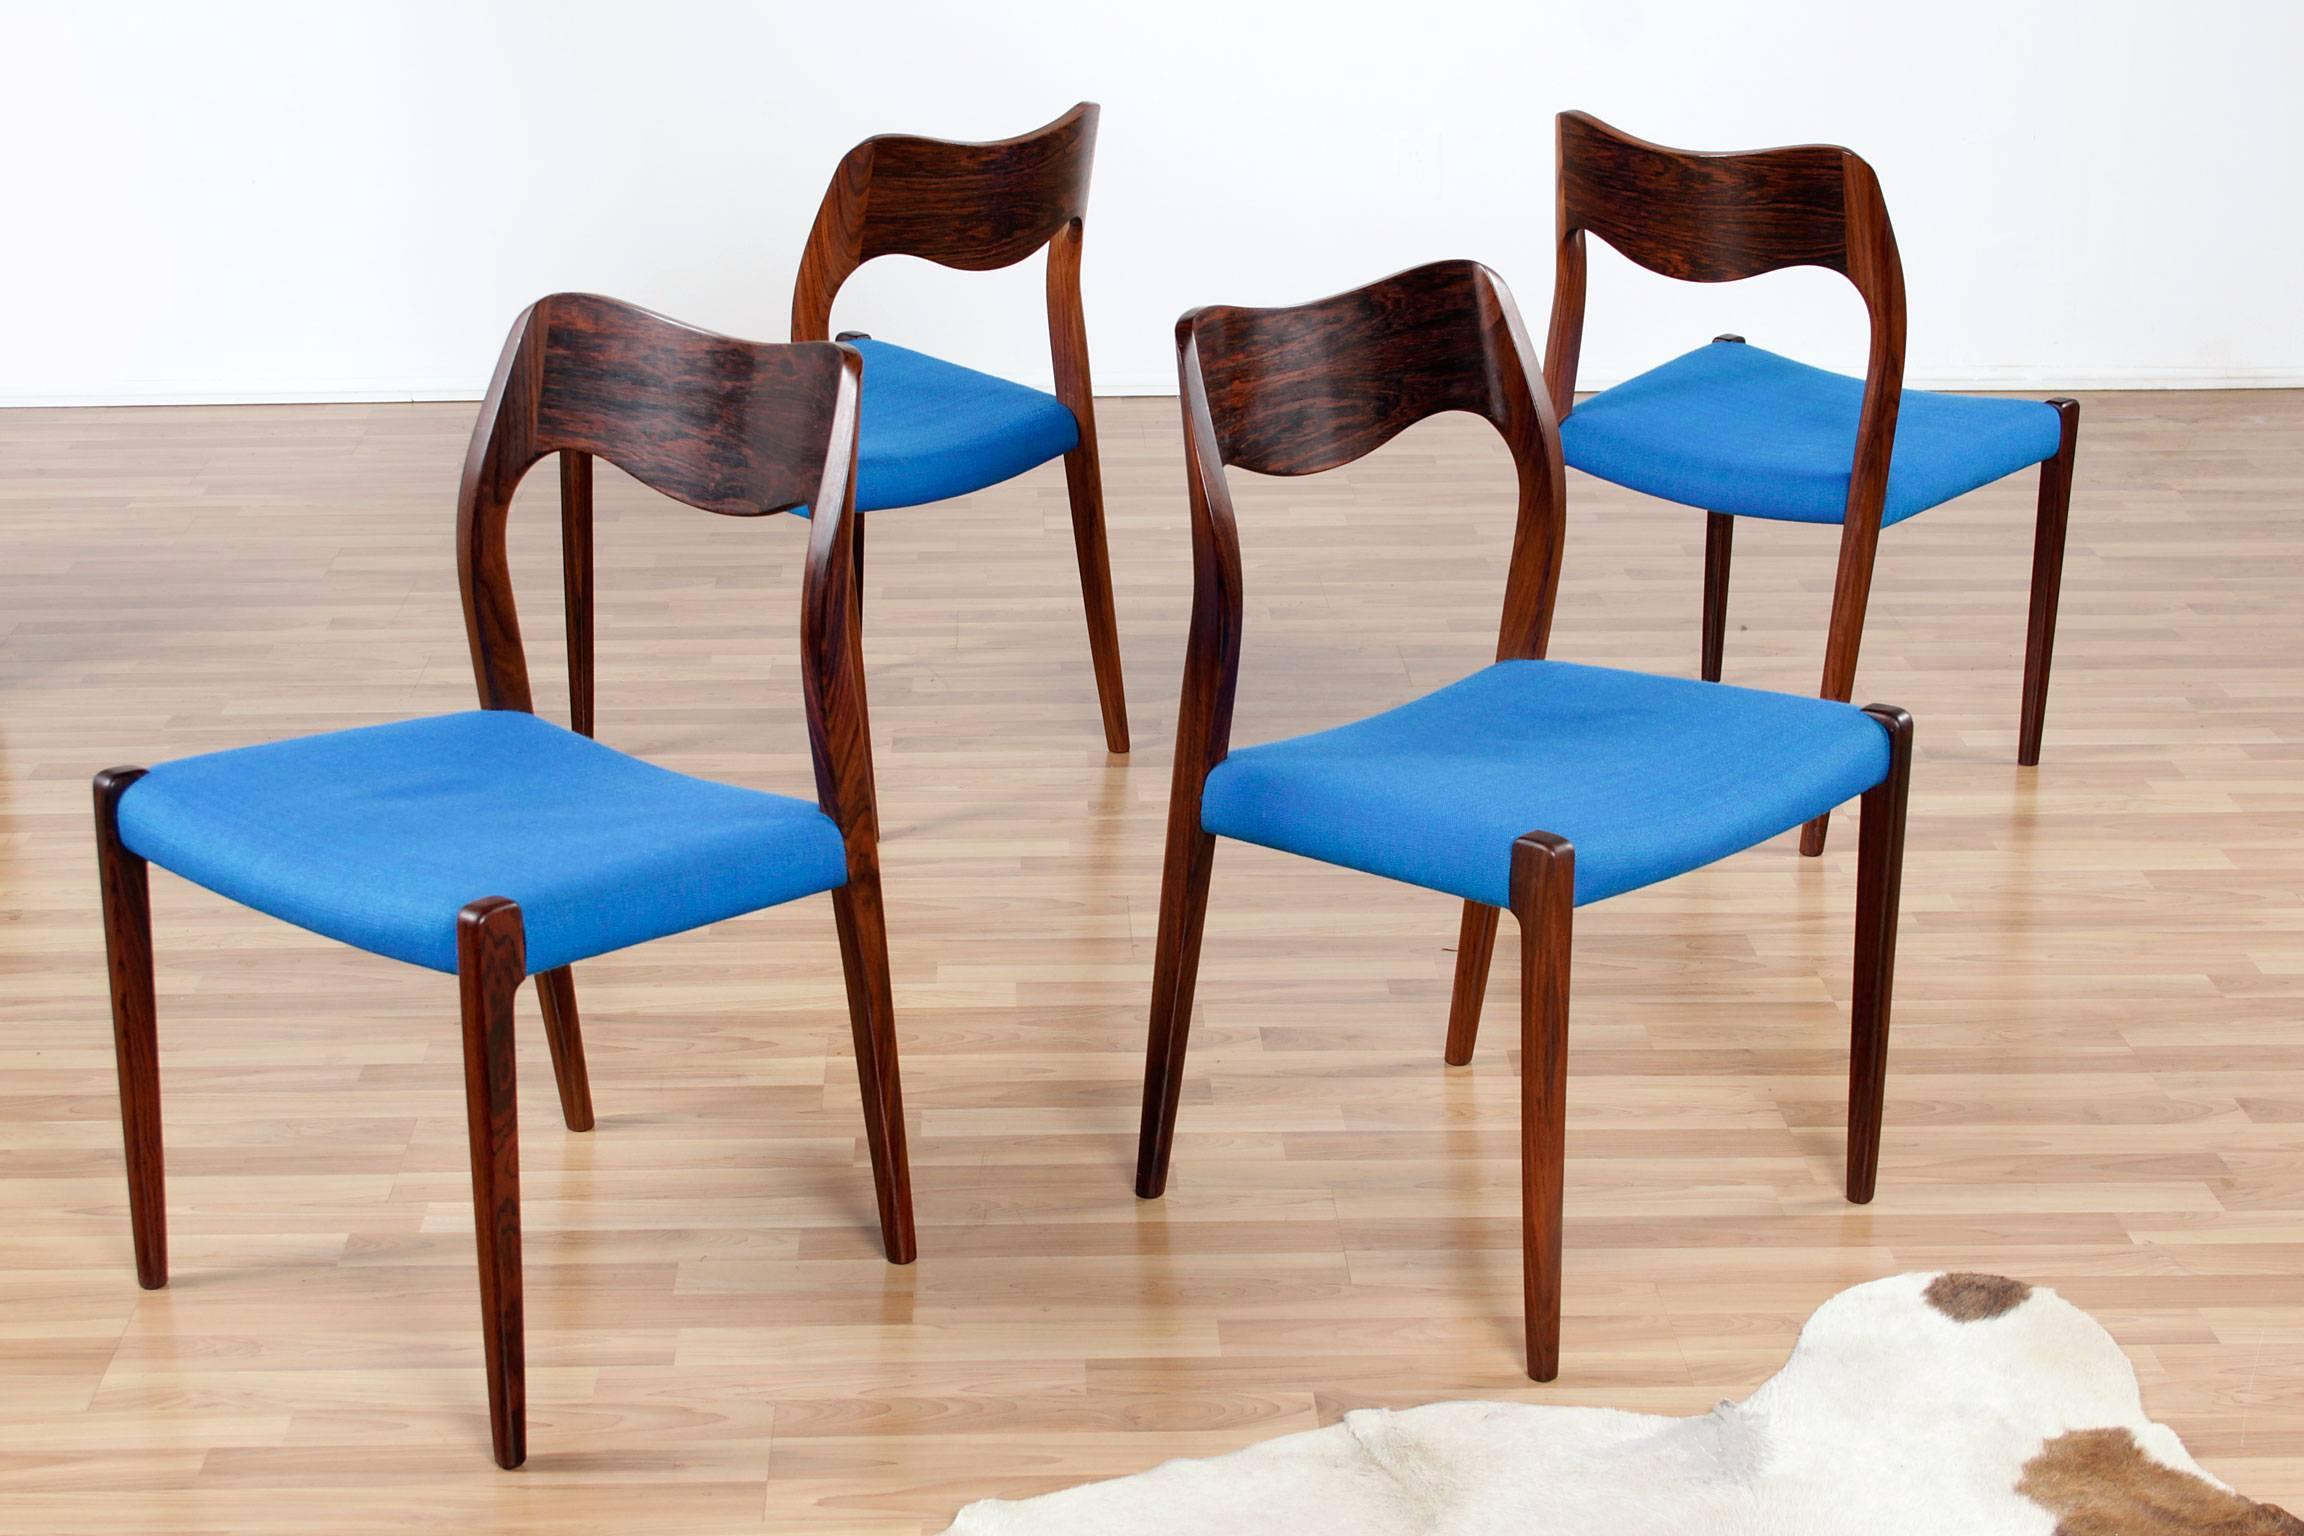 A set of four model 71 rosewood dining chairs, designed by Niels O. Møller and produced by J.L Møllers Møbelfabrik. Made in Denmark, the chairs bear the manufacturer label. This exceptional set of chairs is a ground breaking time capsule find. The